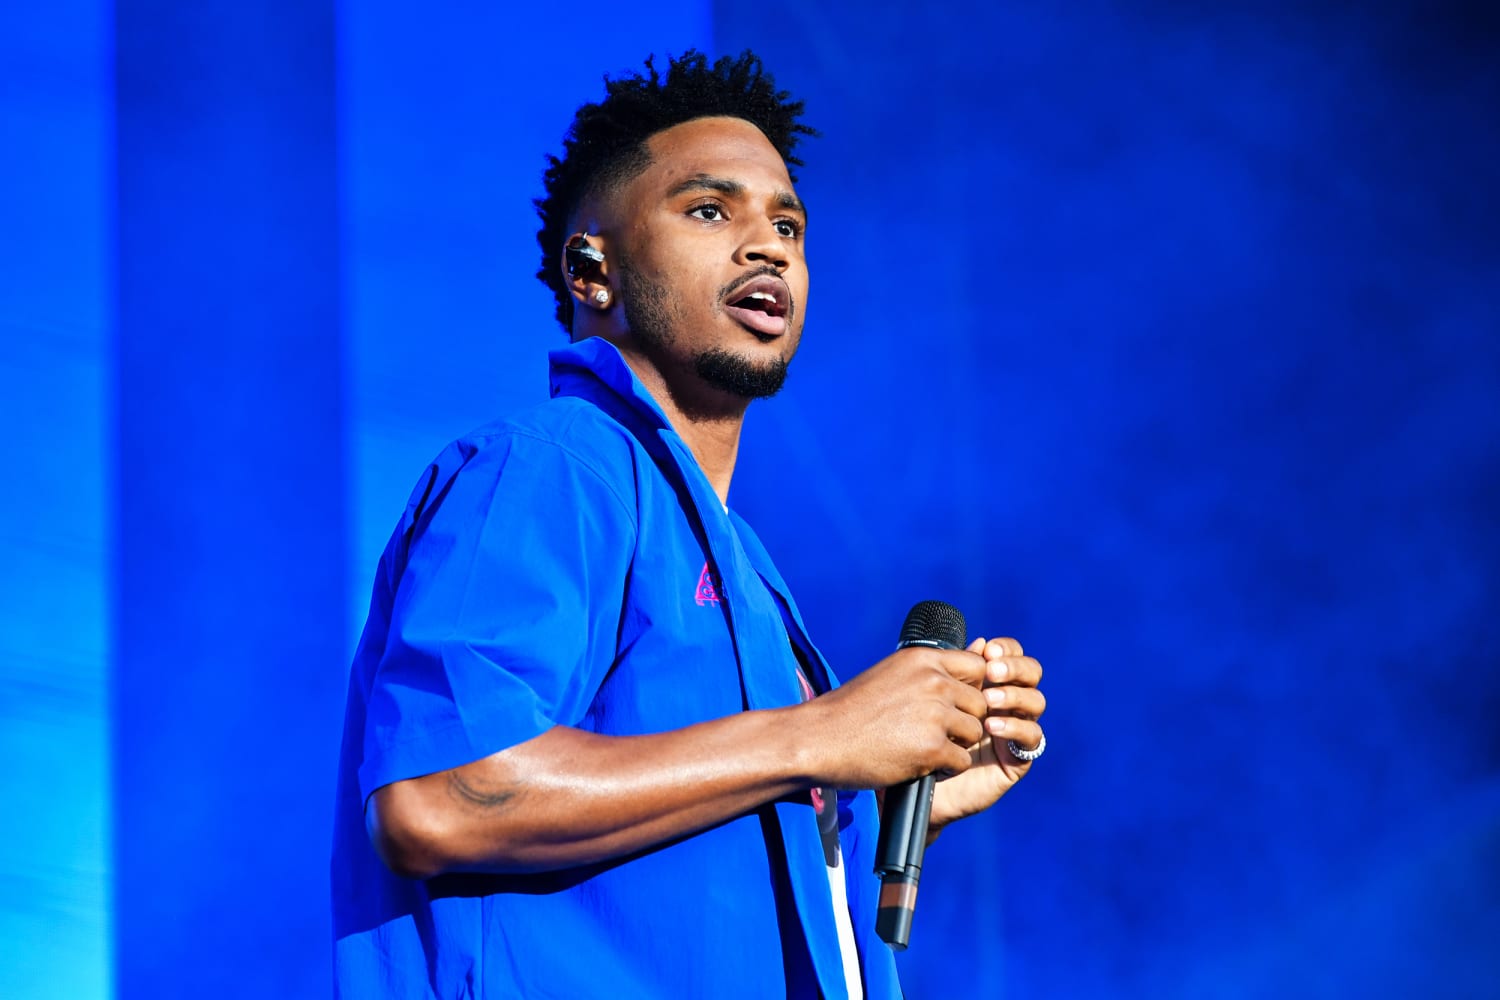 Violent Forced Anal Sex - Trey Songz accused of 'brutal rape' in new lawsuit